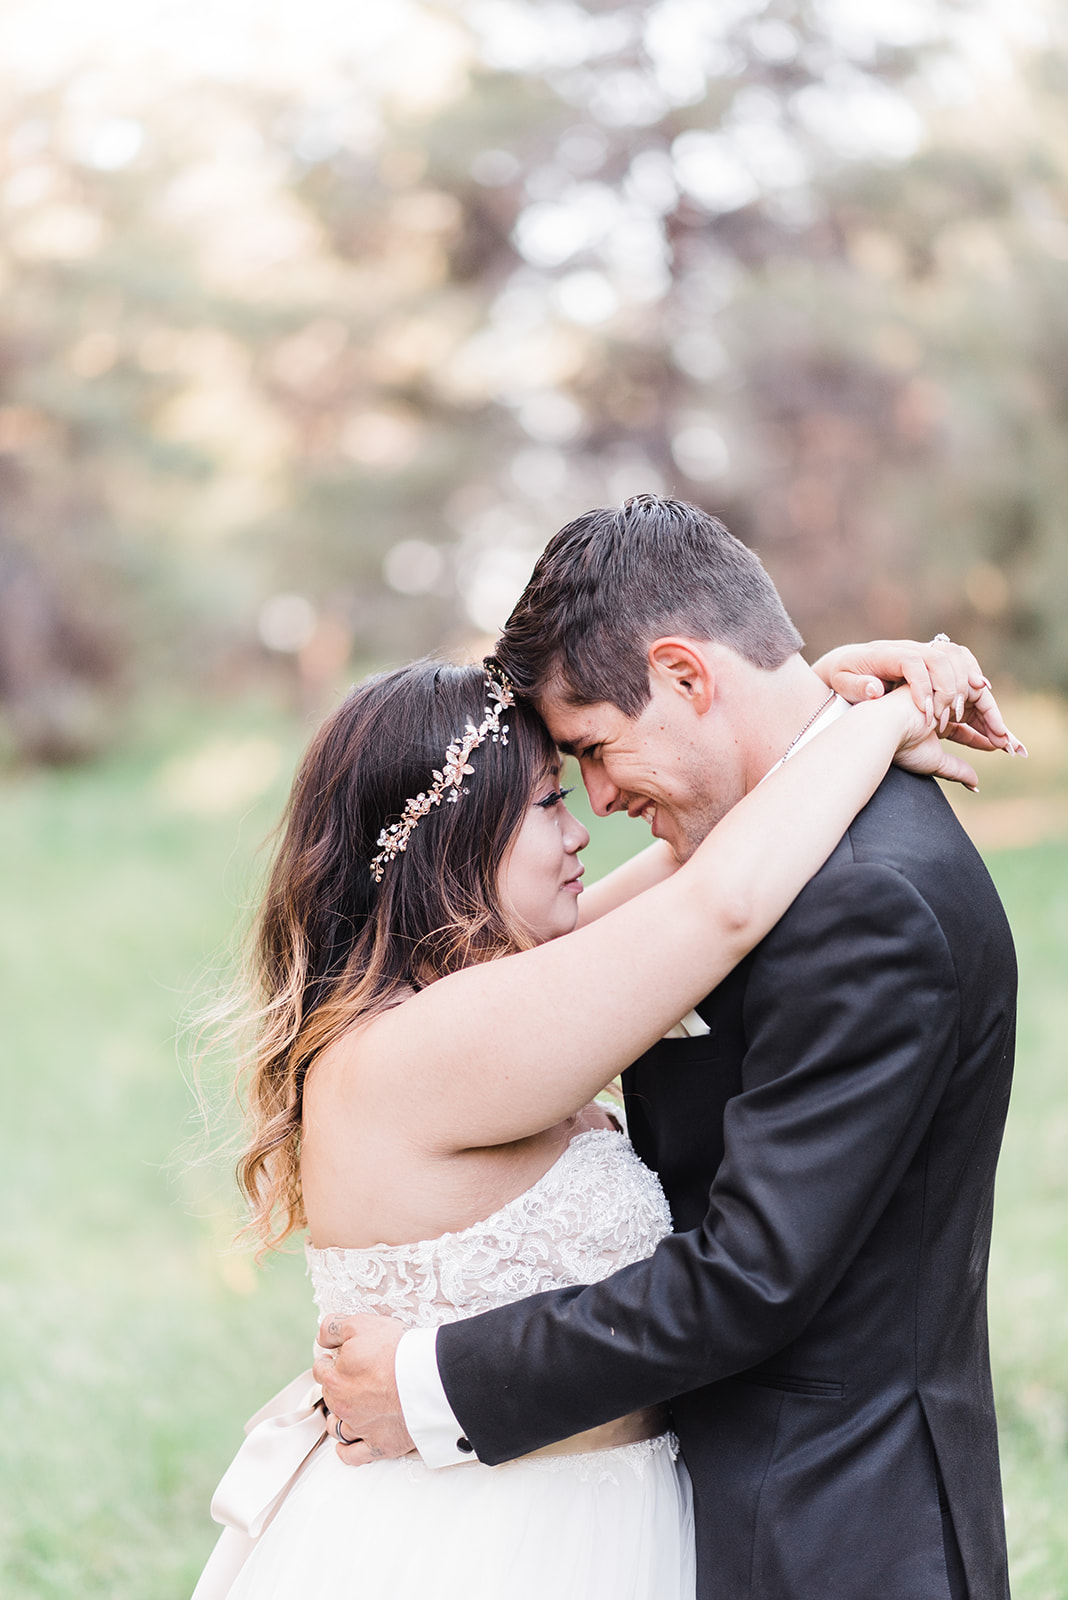 Newlyweds embrace with foreheads touching in a grassy field at Creekside Inn Sedona Wedding